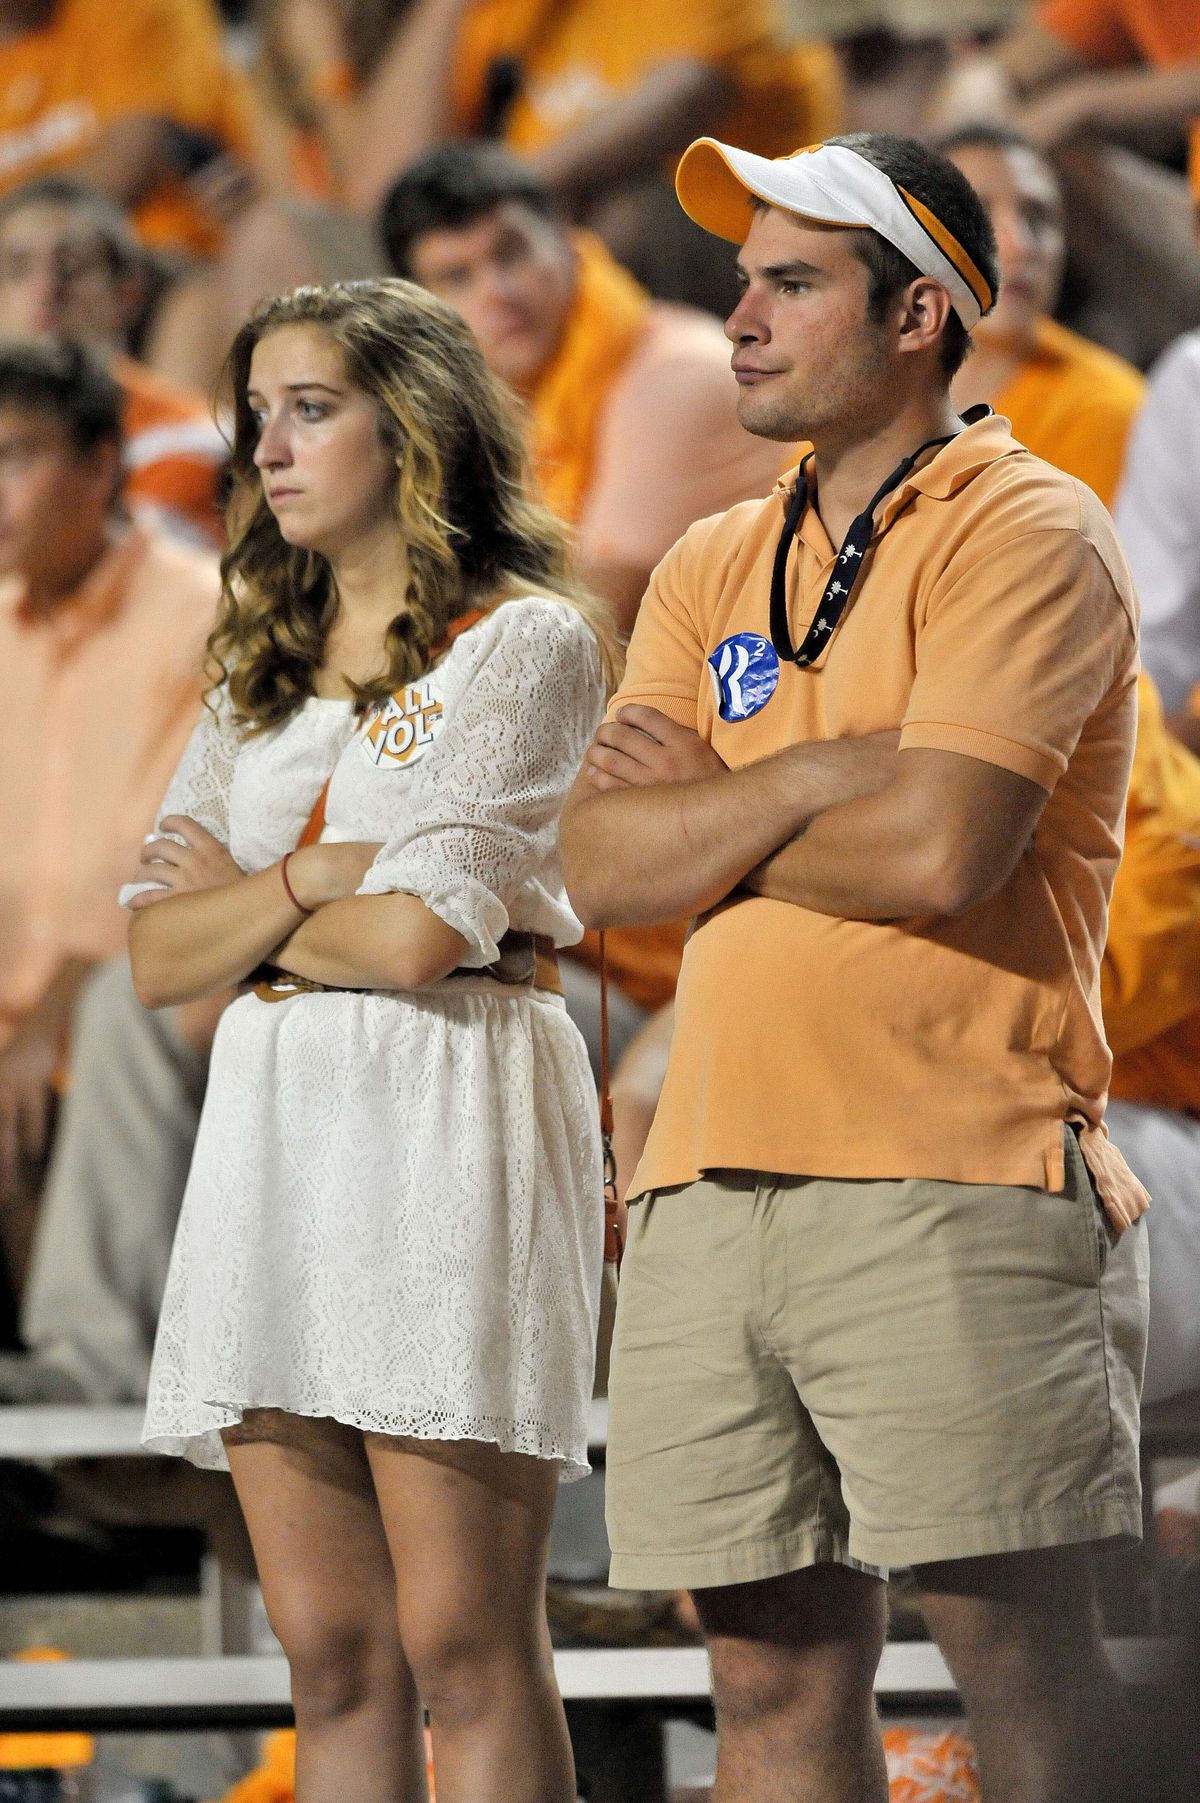 Sep 15, 2012; Knoxville, TN, USA; Tennessee Volunteers fans react to their teams loosing to the Florida Gators during the second half at Neyland Stadium. Florida defeated Tennessee 37-20. Mandatory Credit: Jim Brown-US PRESSWIRE